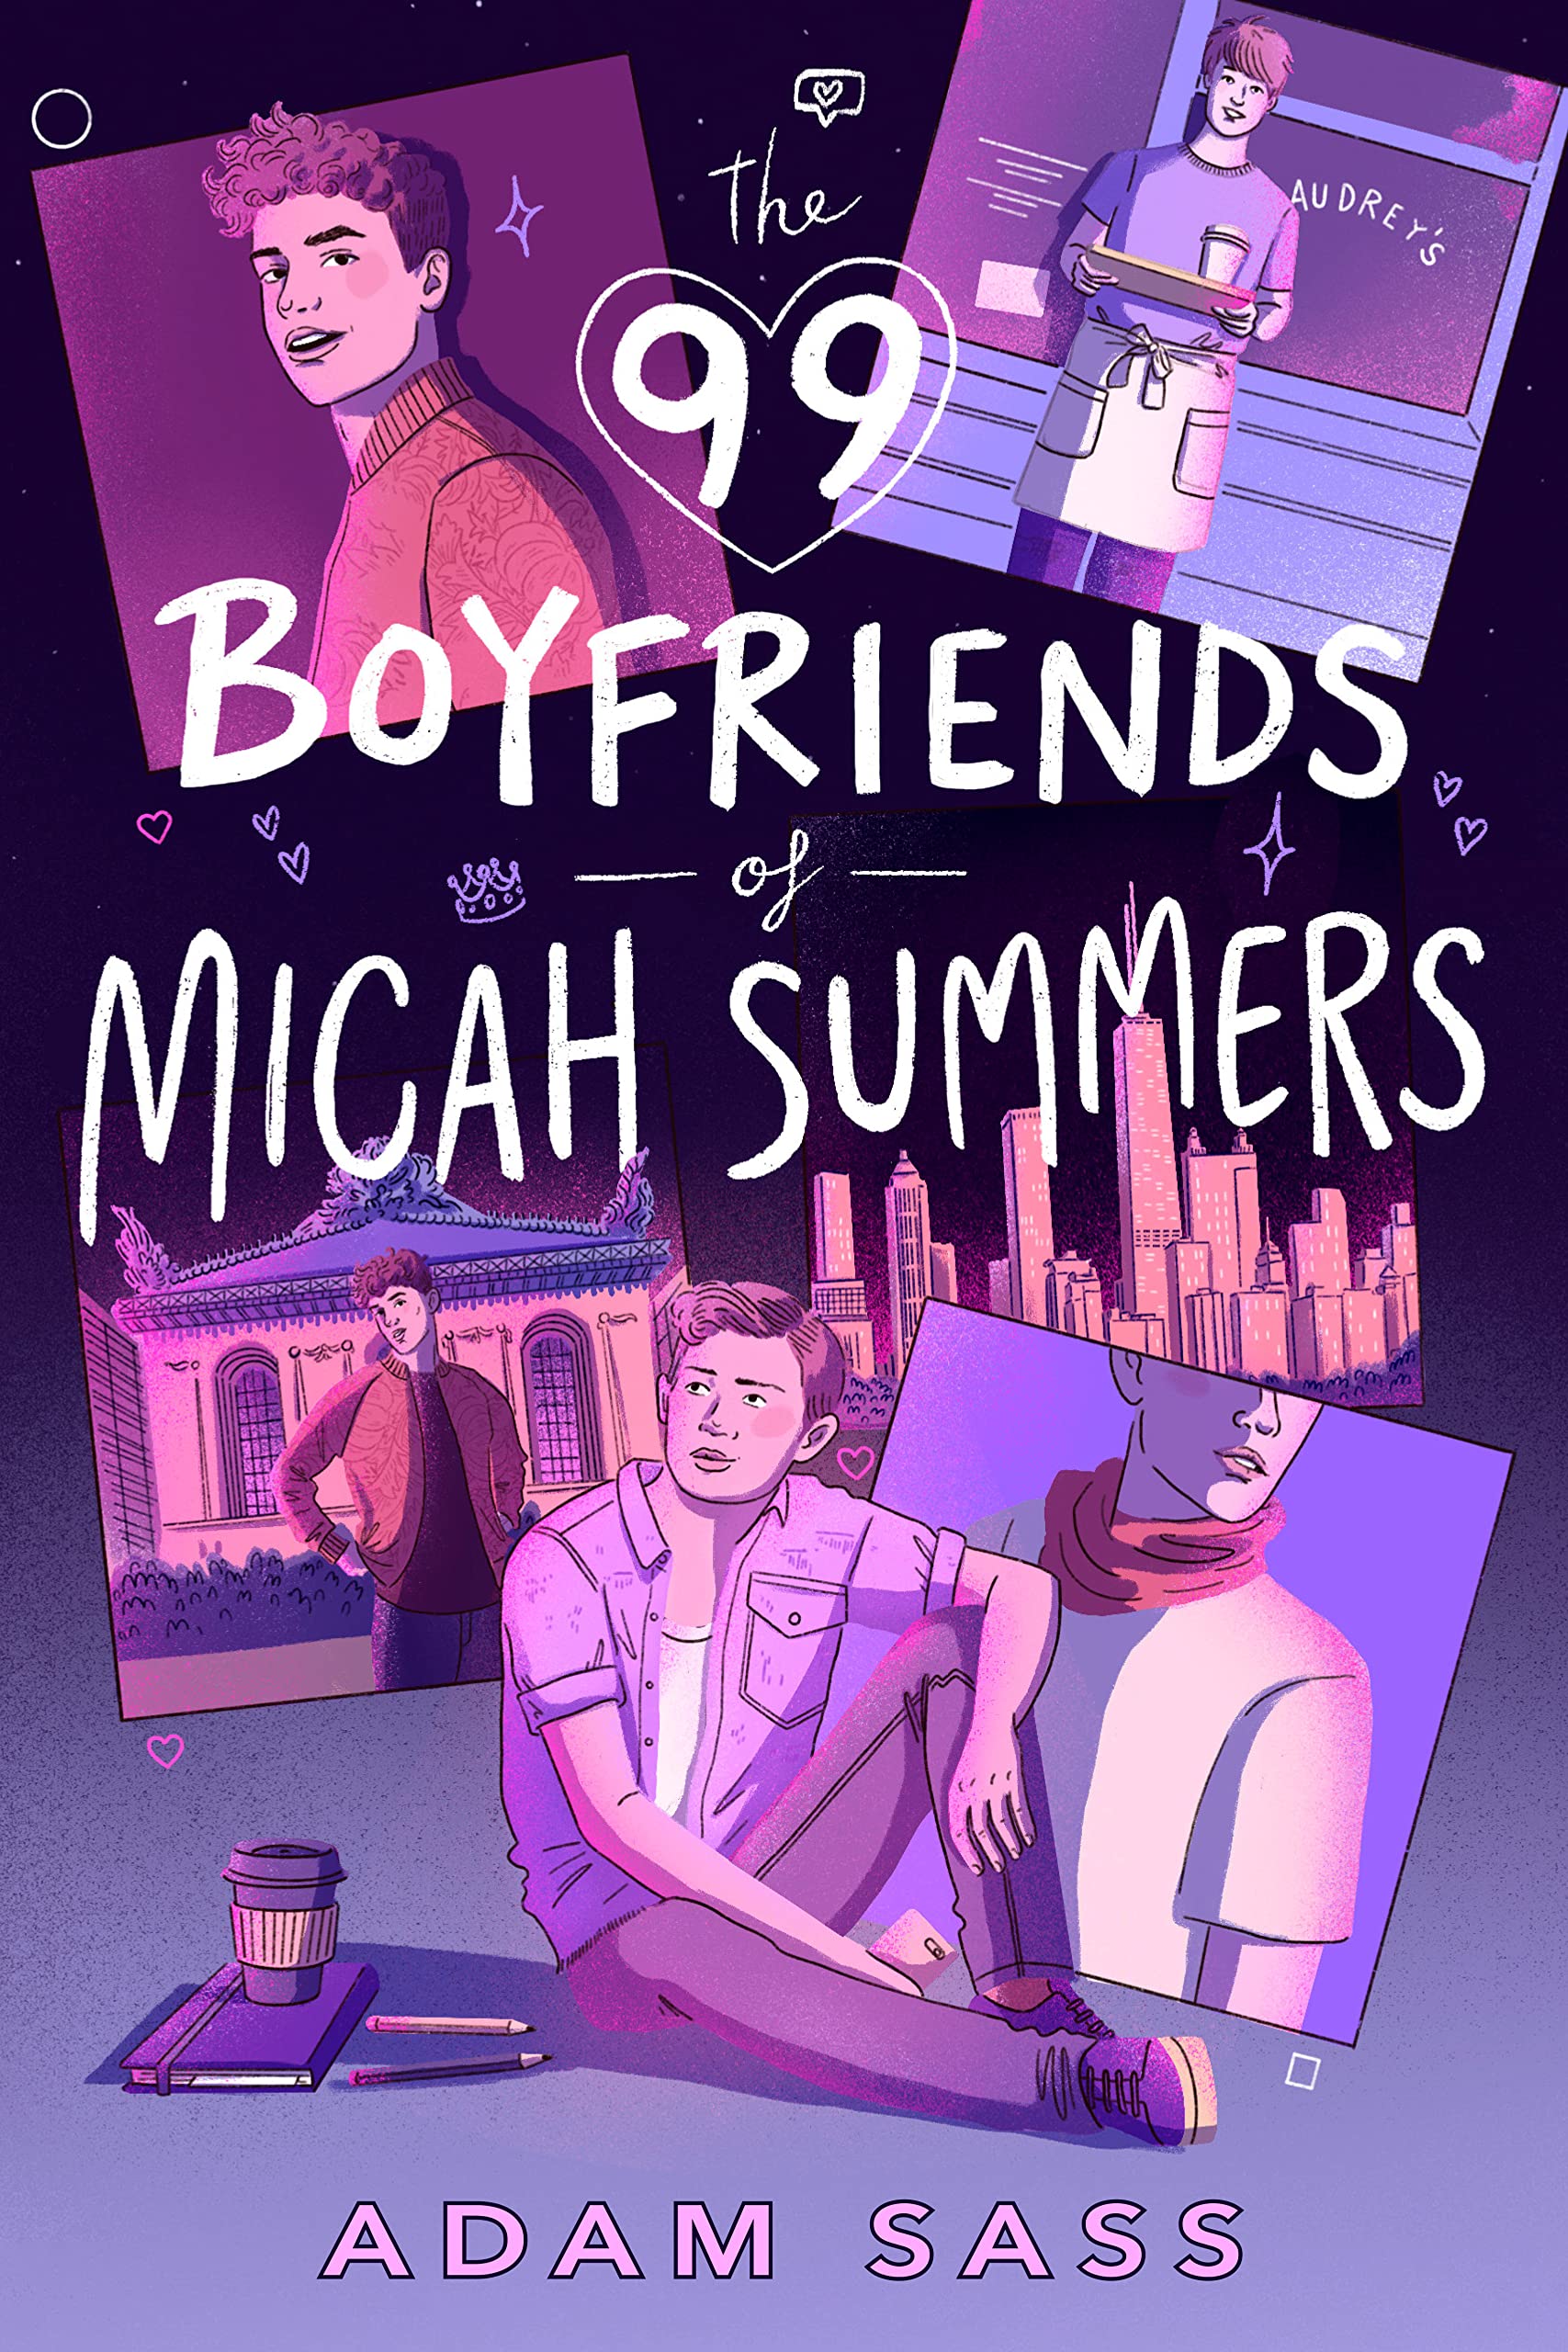 The 99 Boyfriends of Micah Summers books